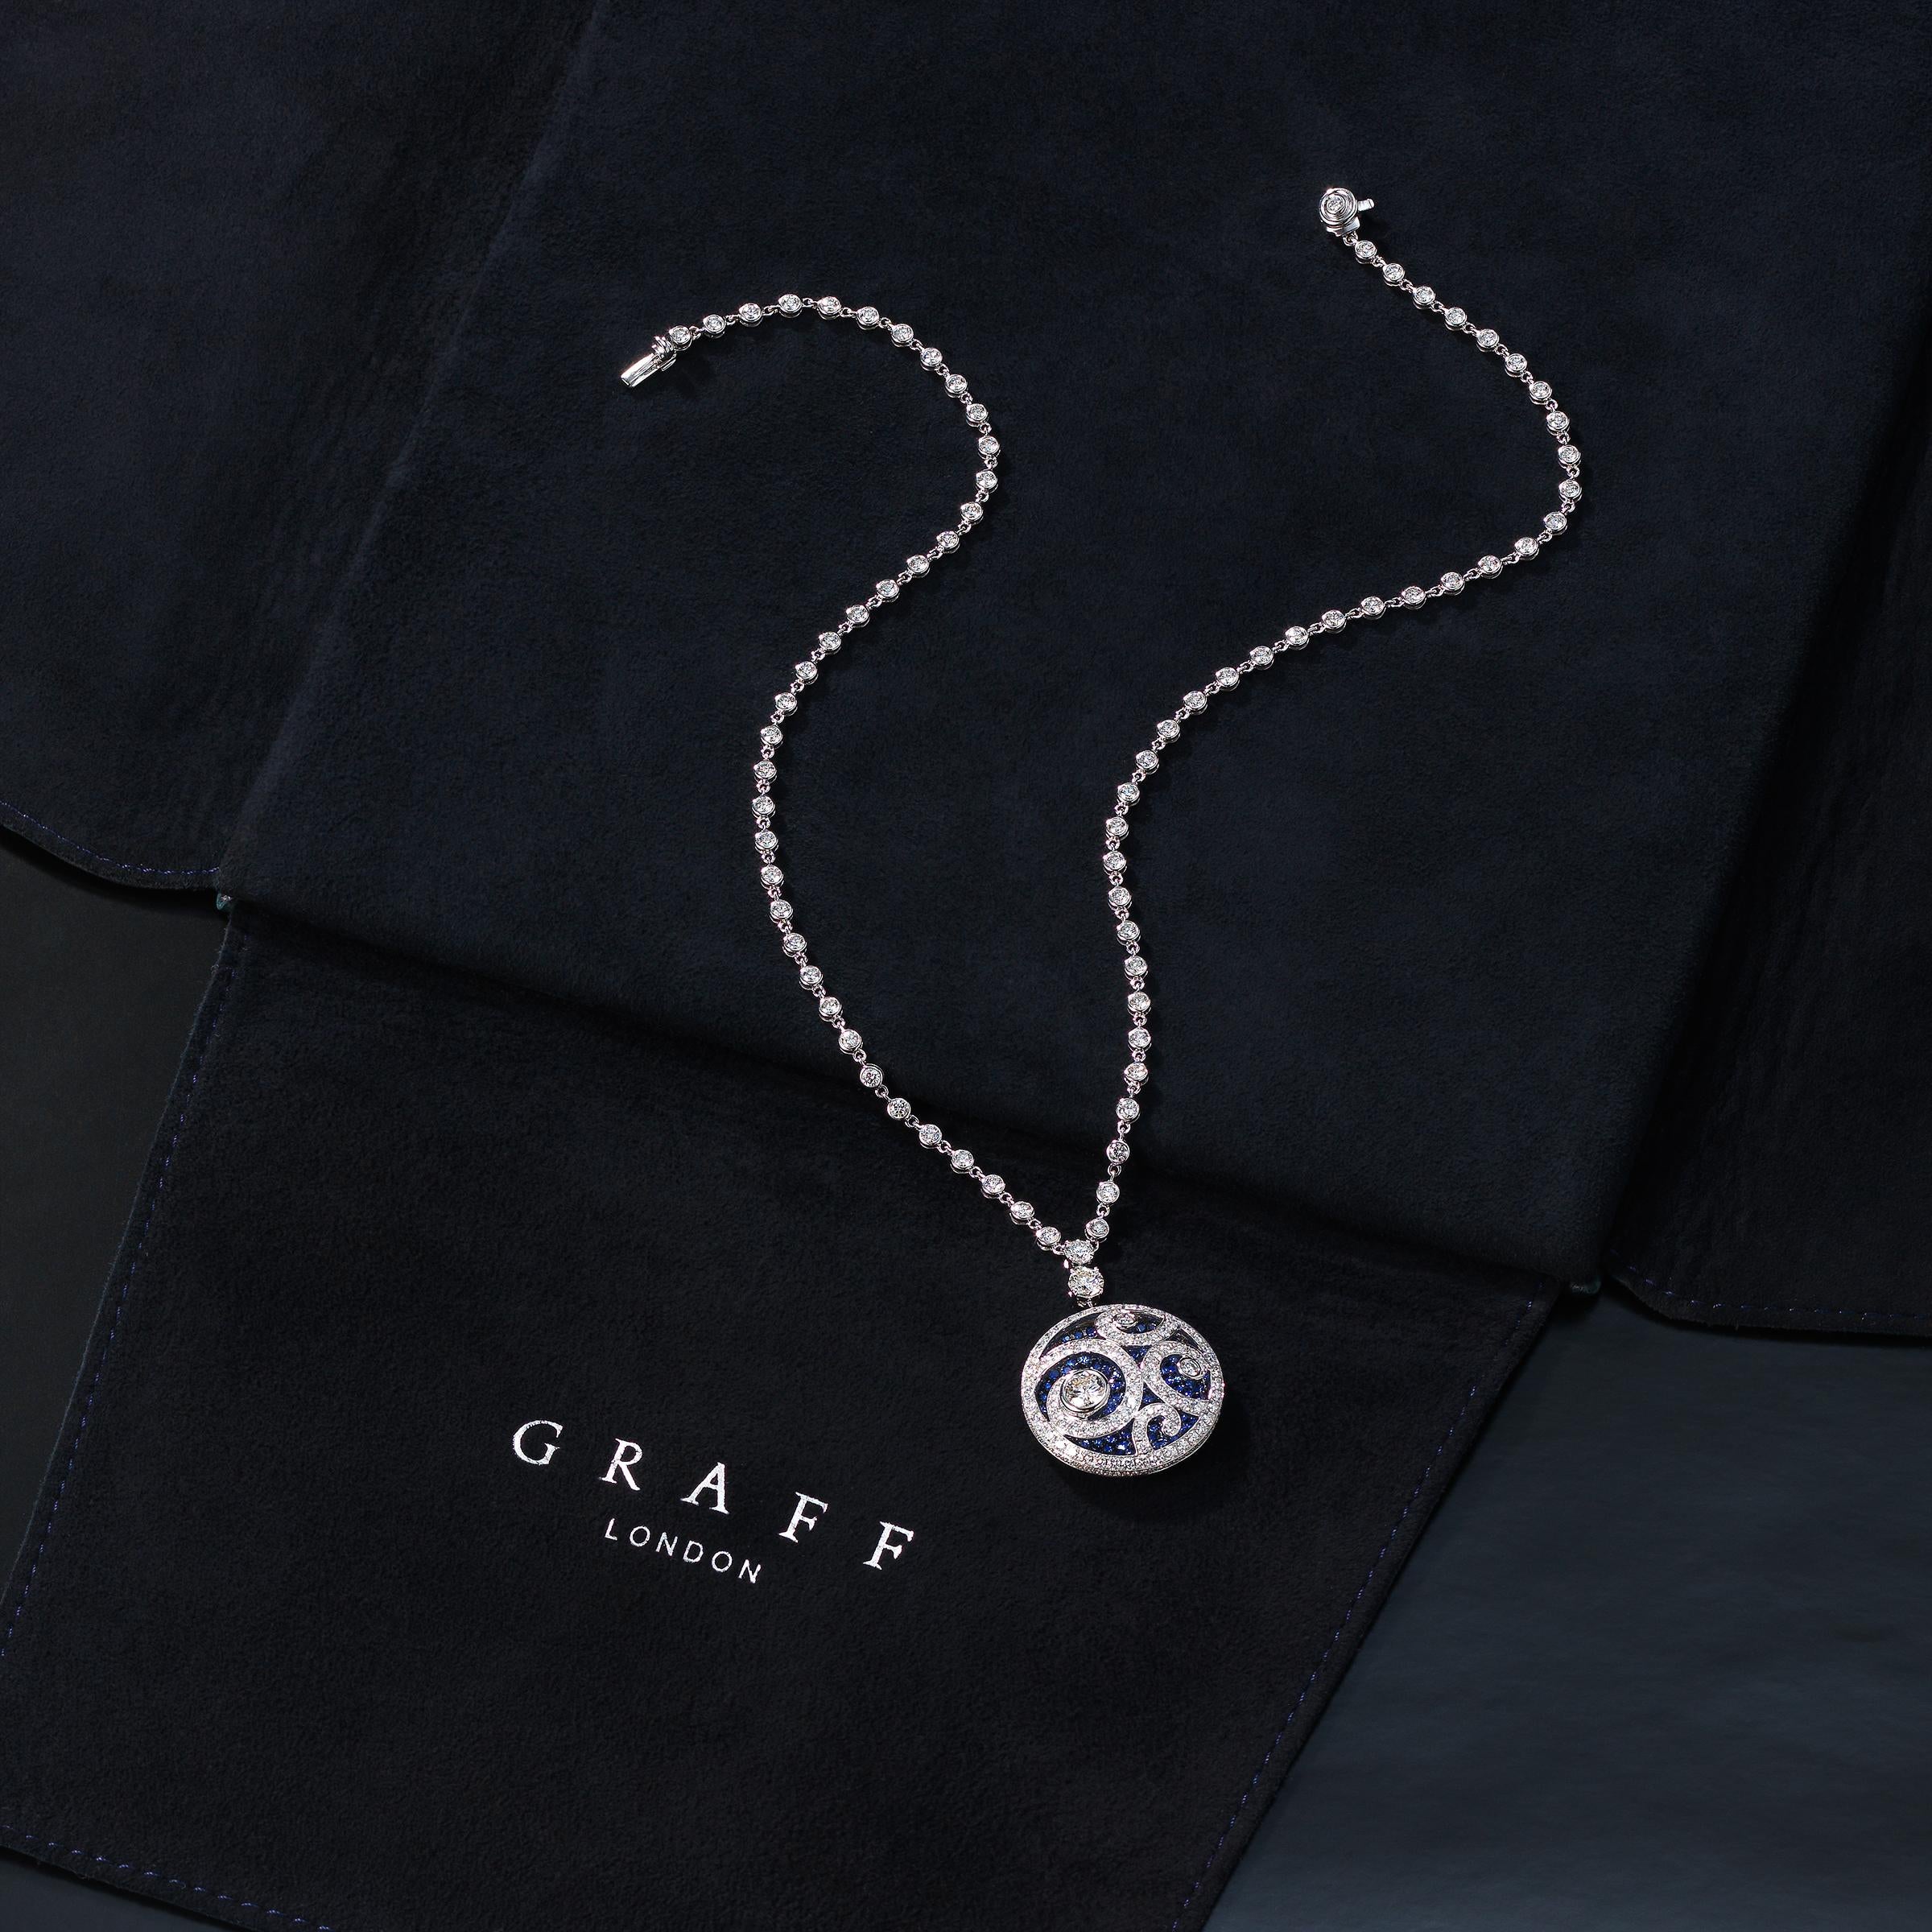 Graff Sapphire Diamond Pendant Necklace in 18K Gold with GIA Certificate & Case For Sale 2